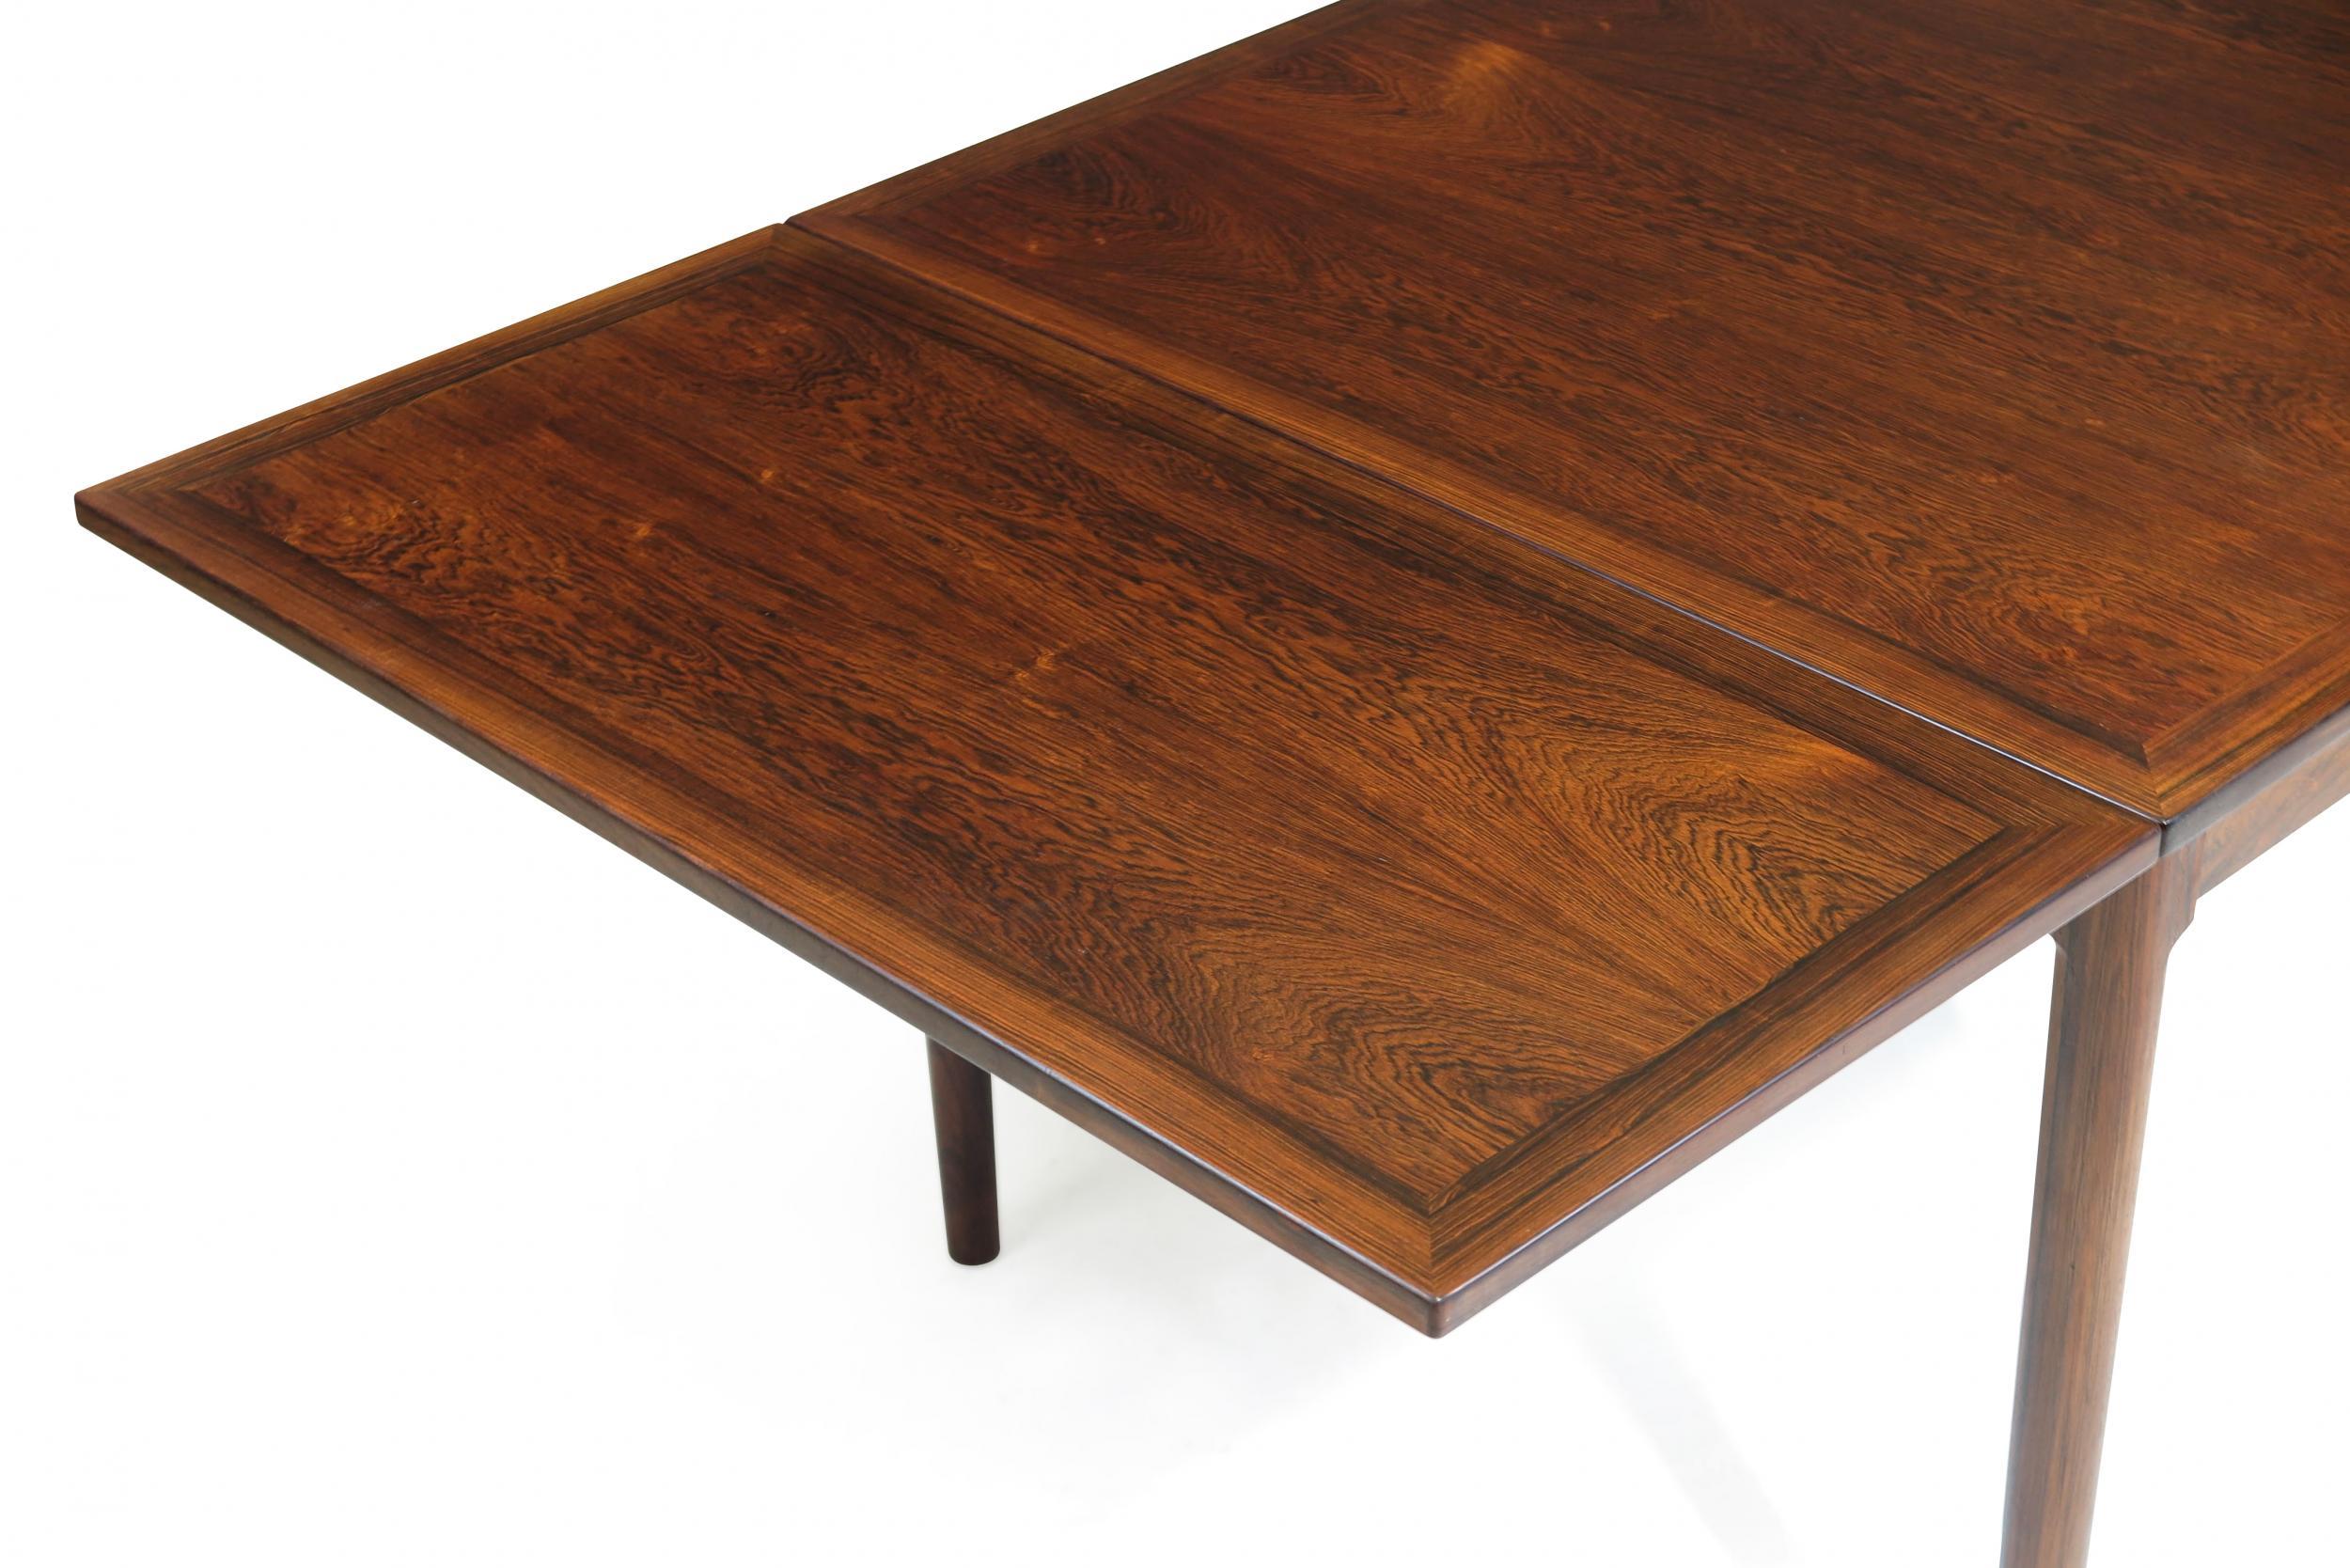 20th Century Brazilian Rosewood Drop Leaf Dining Table